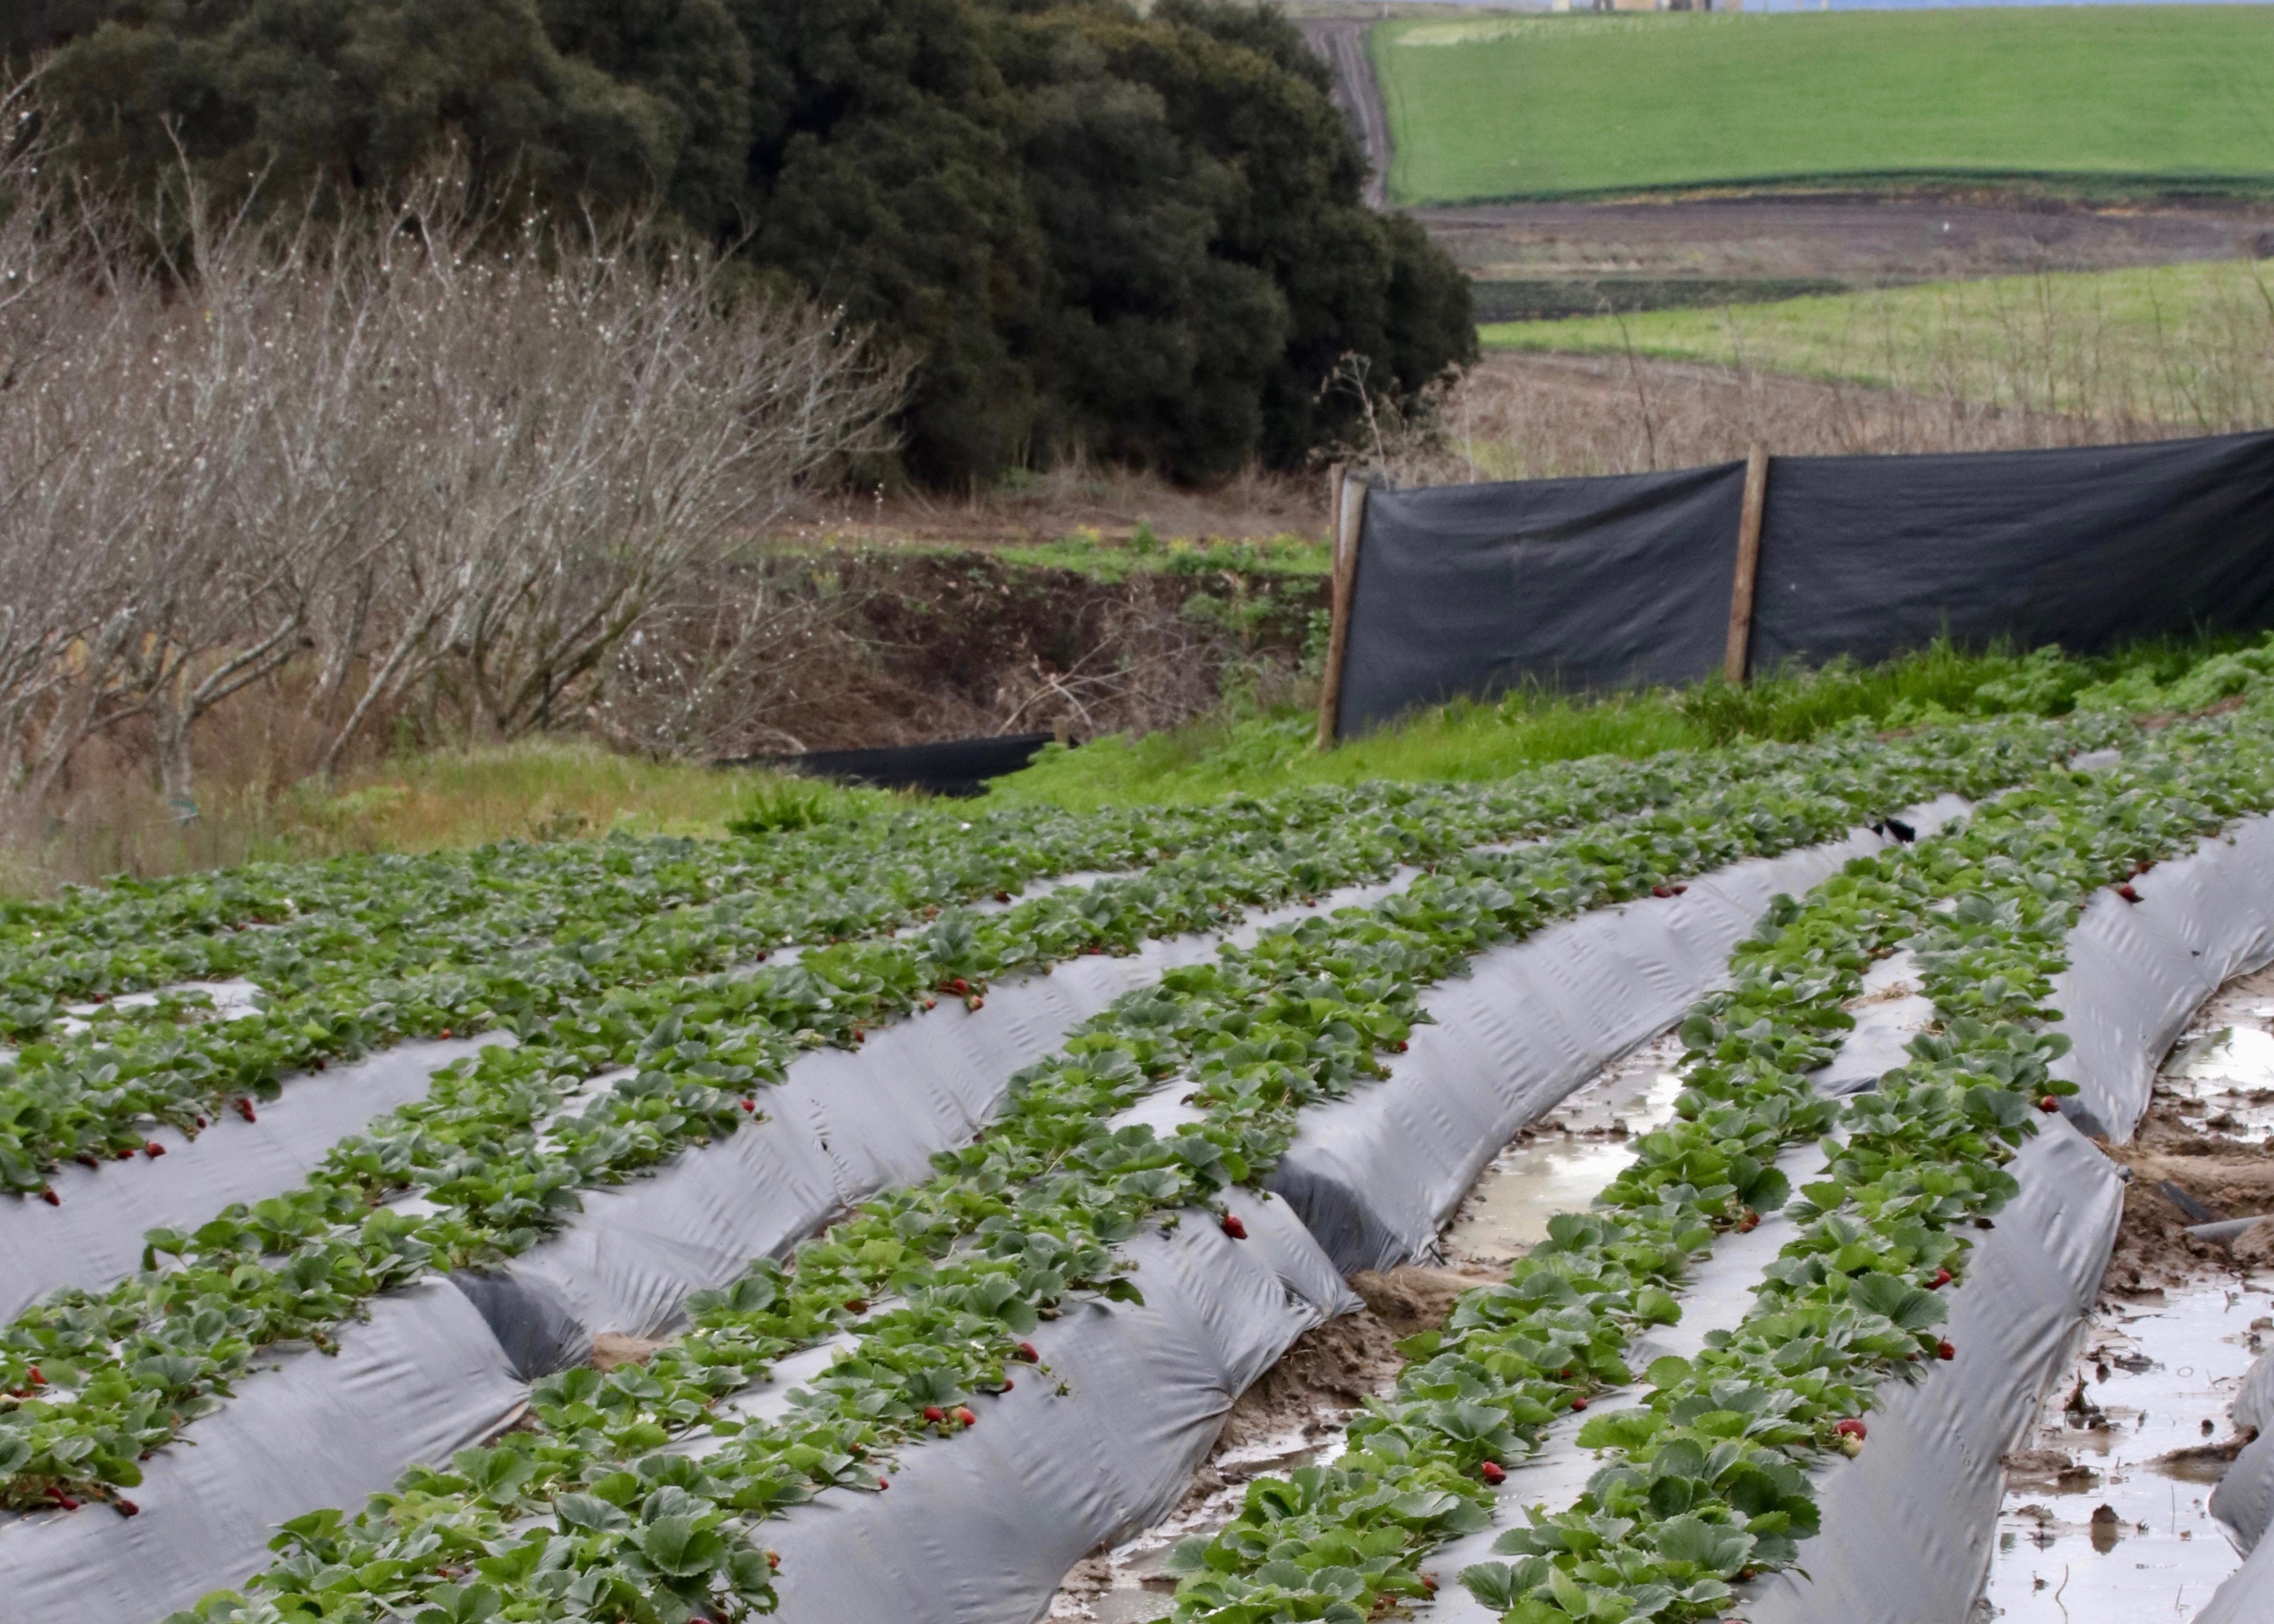 Rows of strawberries in a field grow next to shrubs and trees in California's Central Coast. 